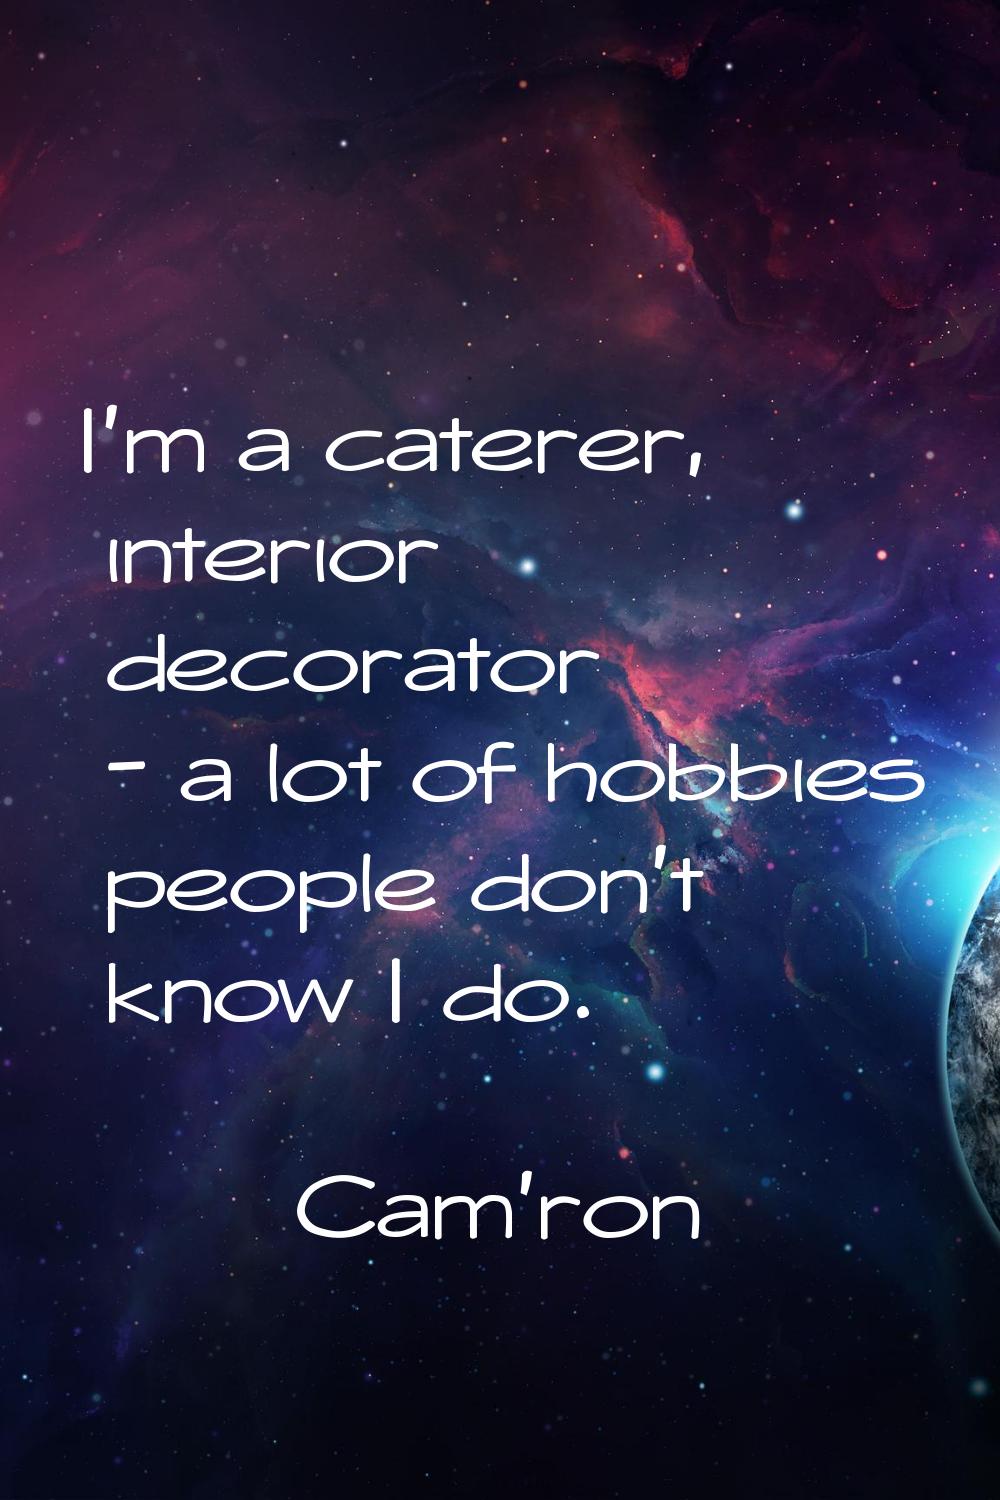 I'm a caterer, interior decorator - a lot of hobbies people don't know I do.